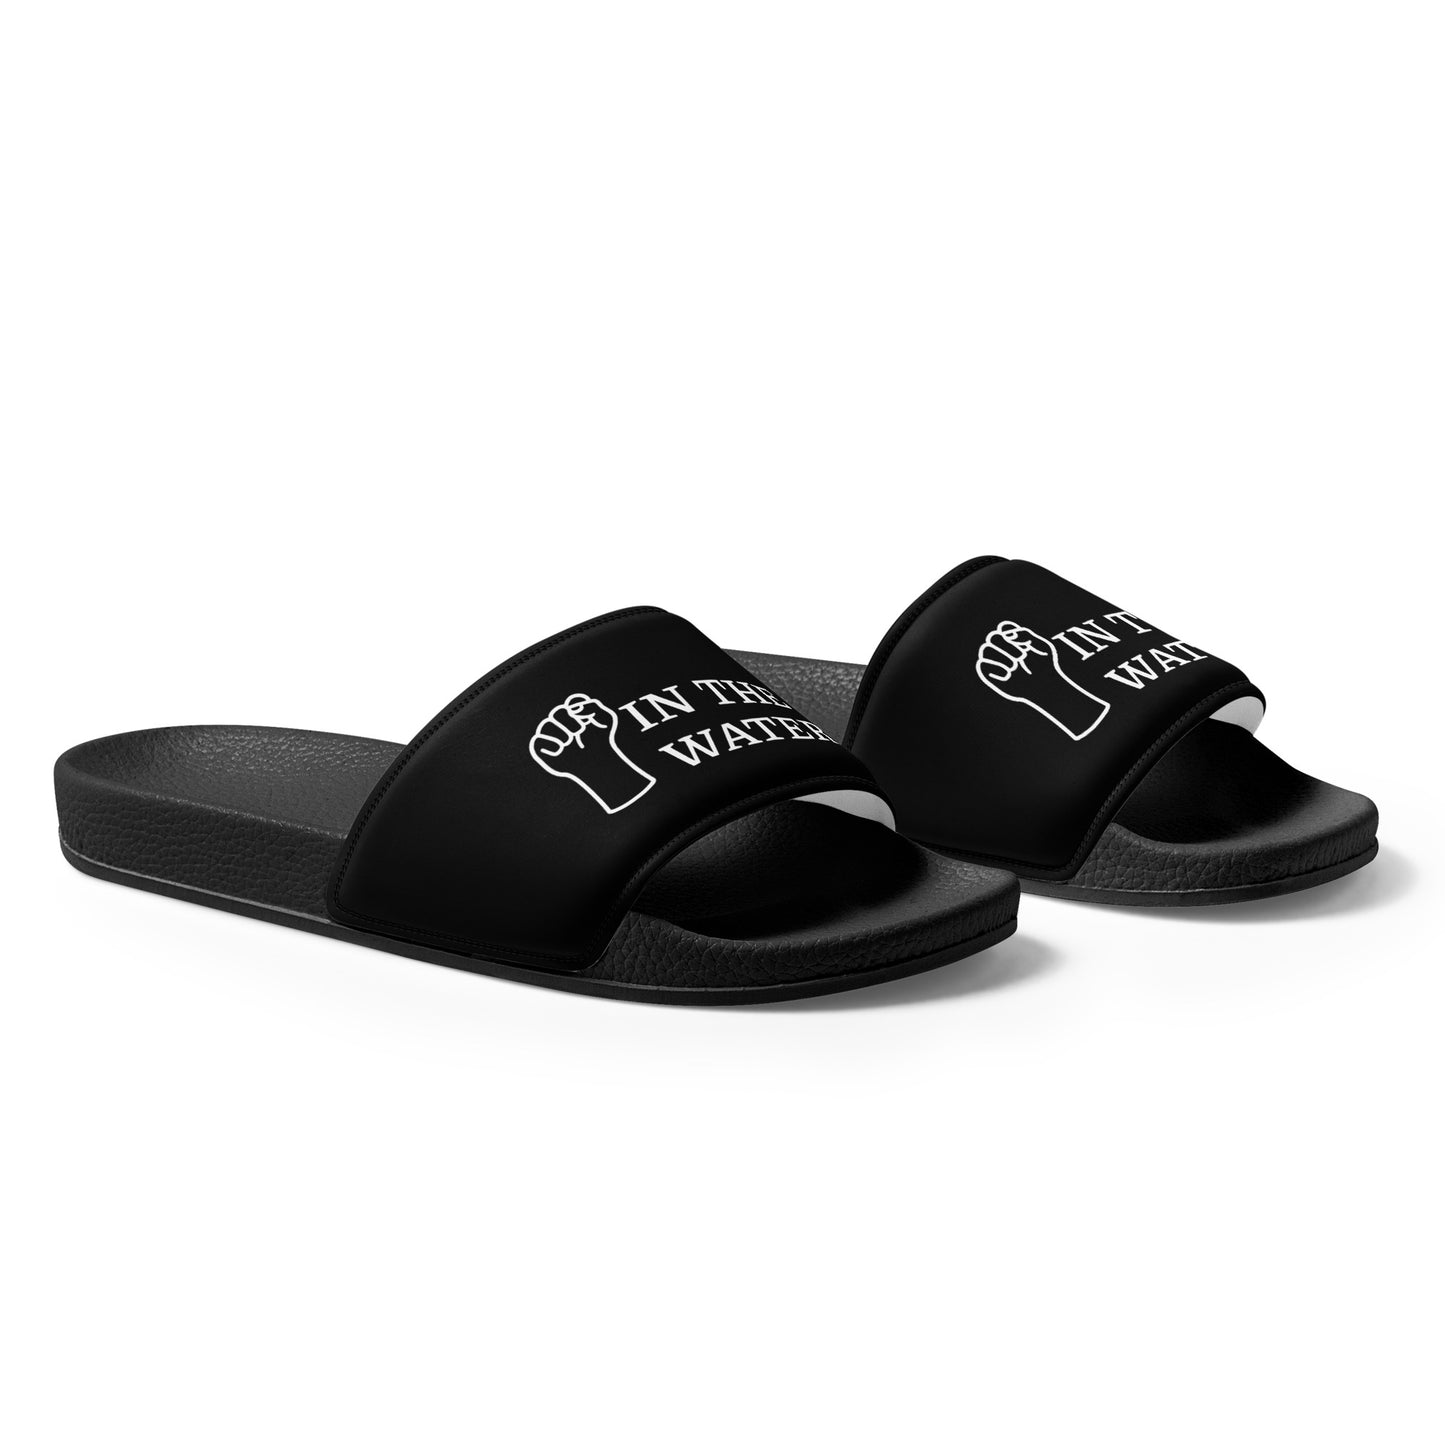 Fade in the Water Women's slides